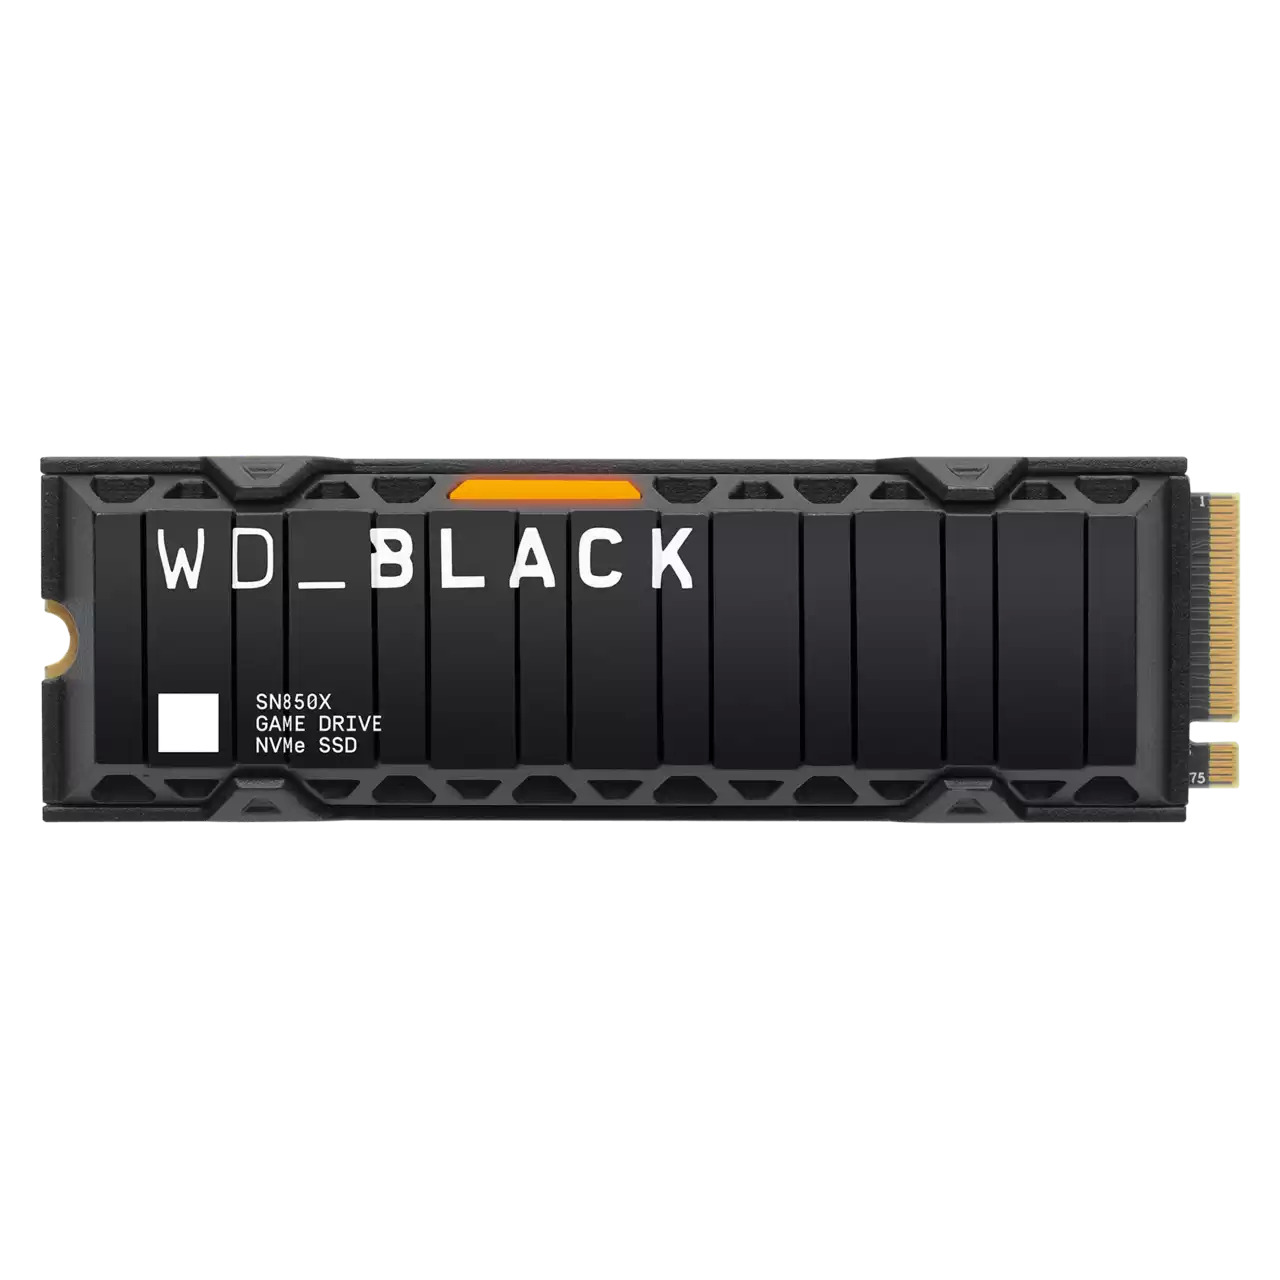 WD_BLACK SN850X NVMe Solid State Drive: 1TB $76.50 4TB $297 + Free Shipping